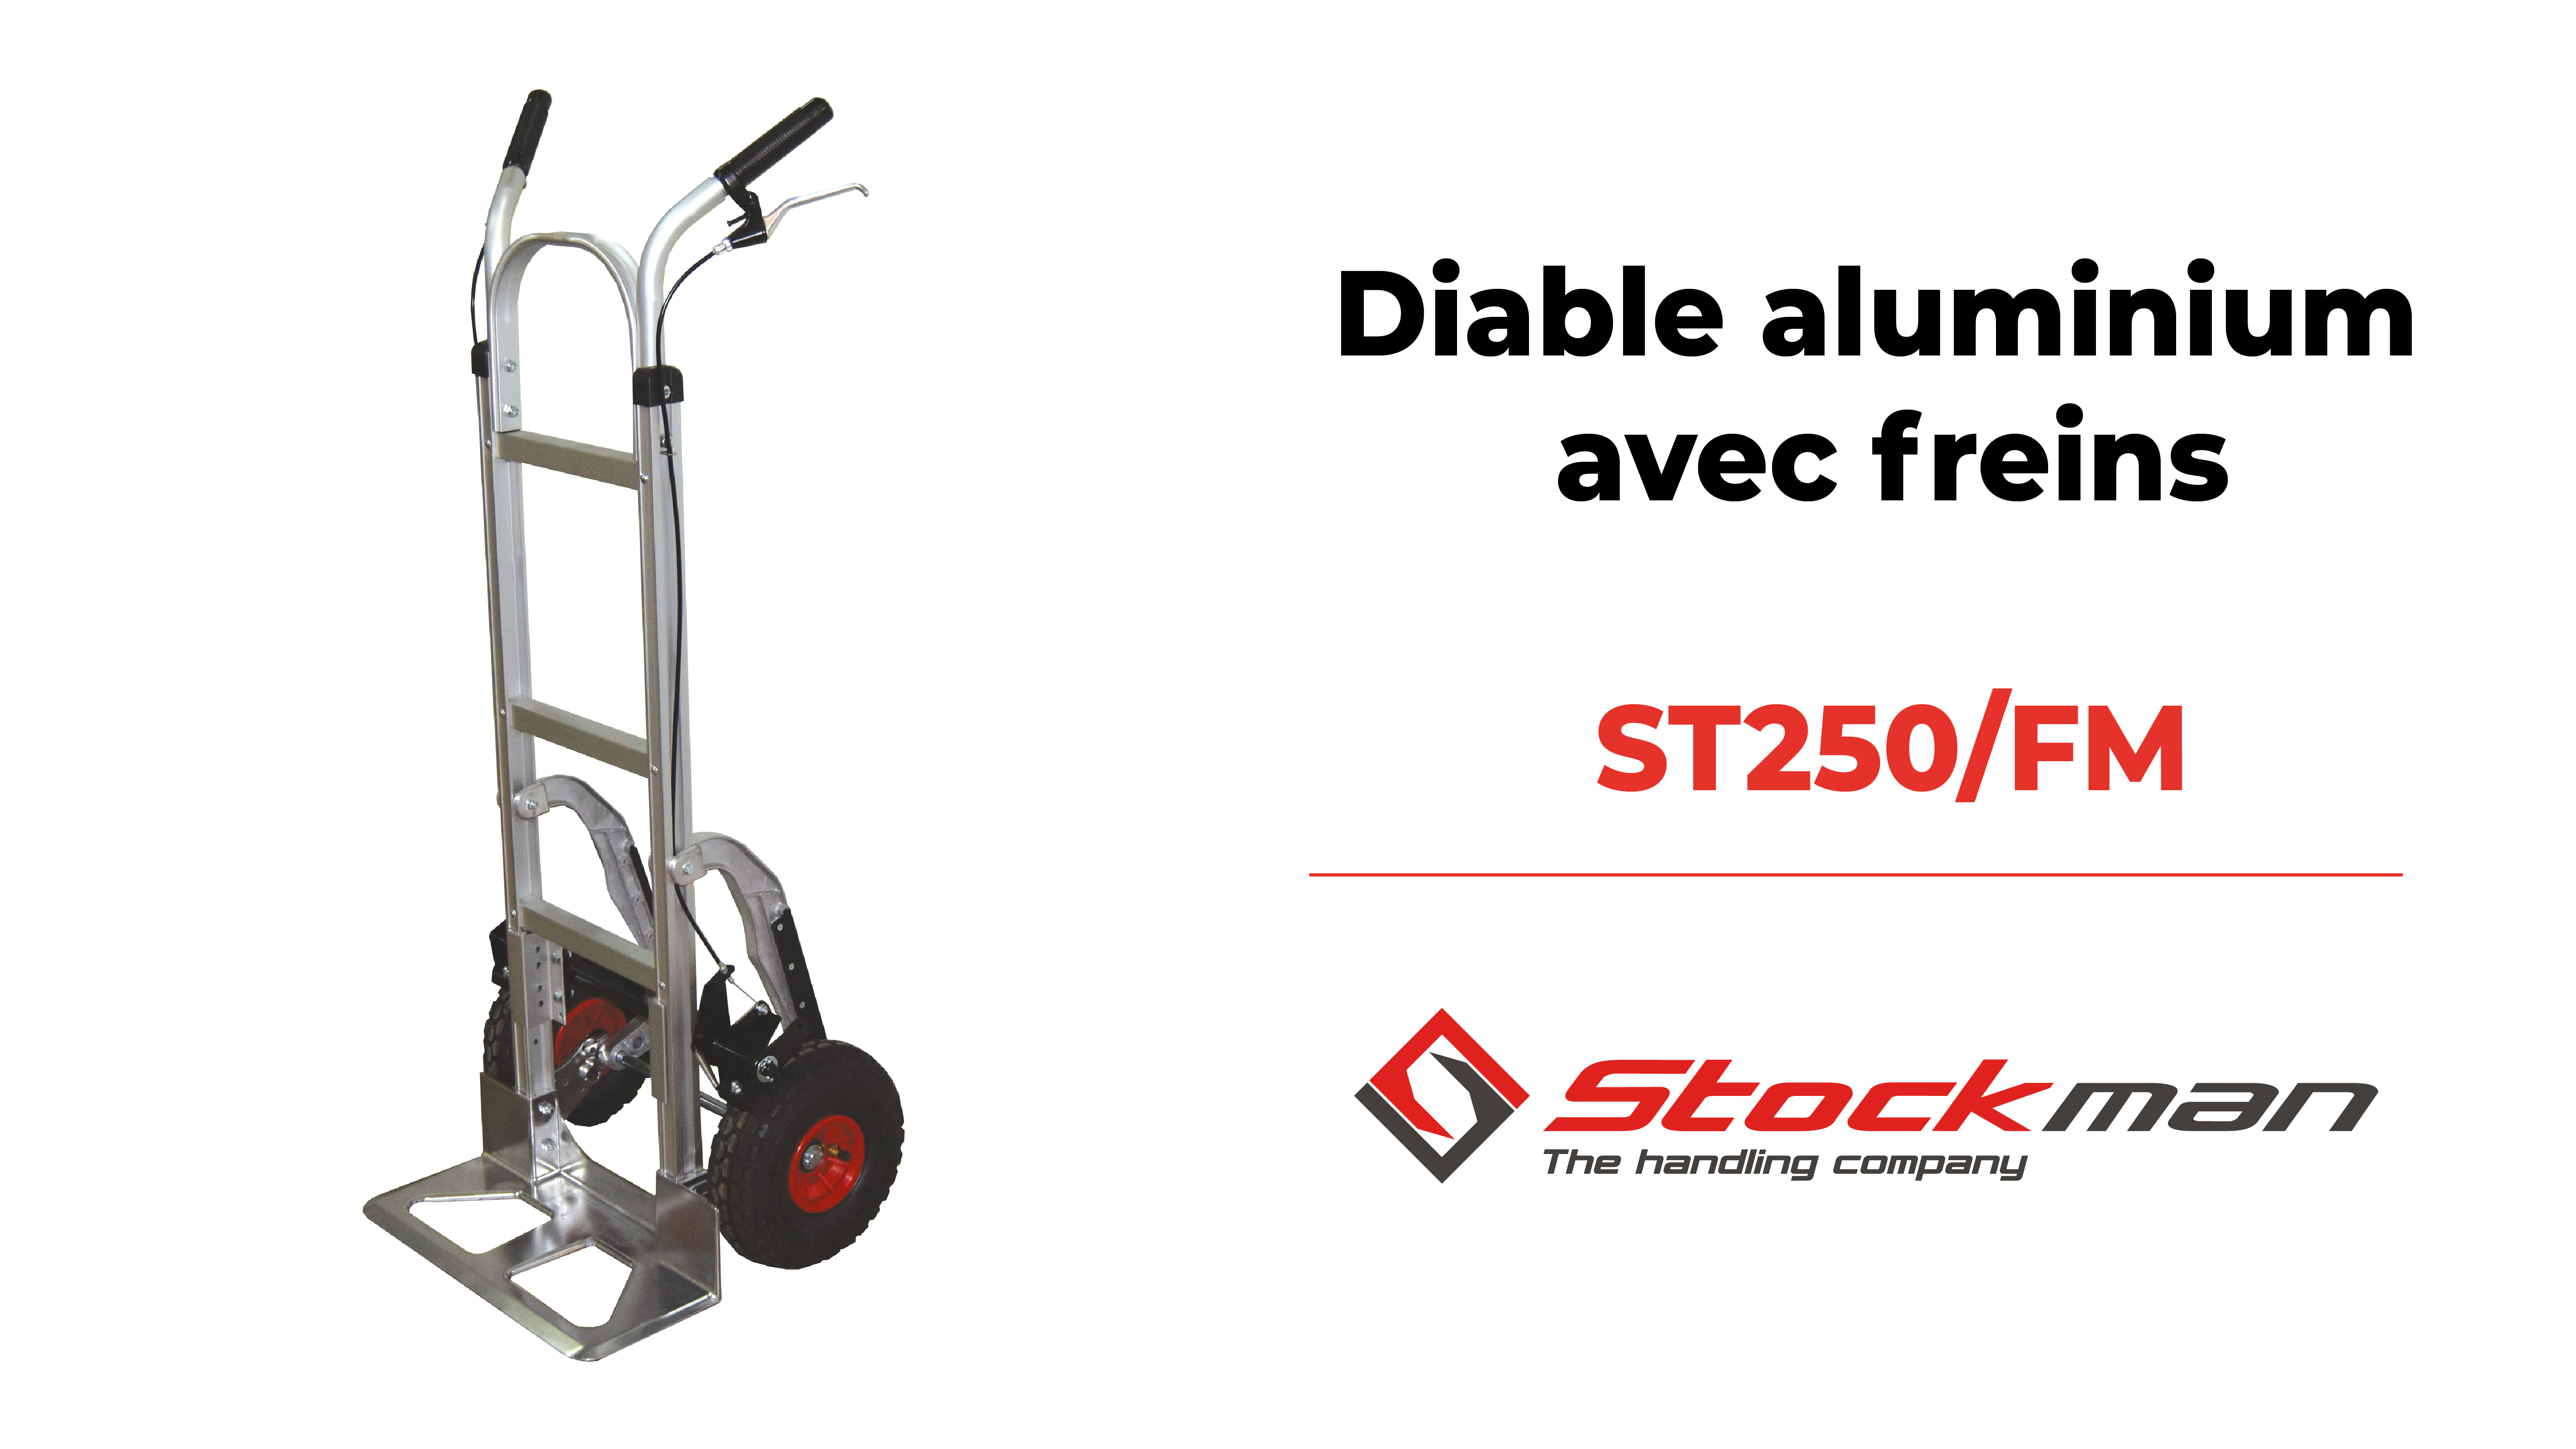 The aluminium sack truck with brakes for loads up to 250 kg